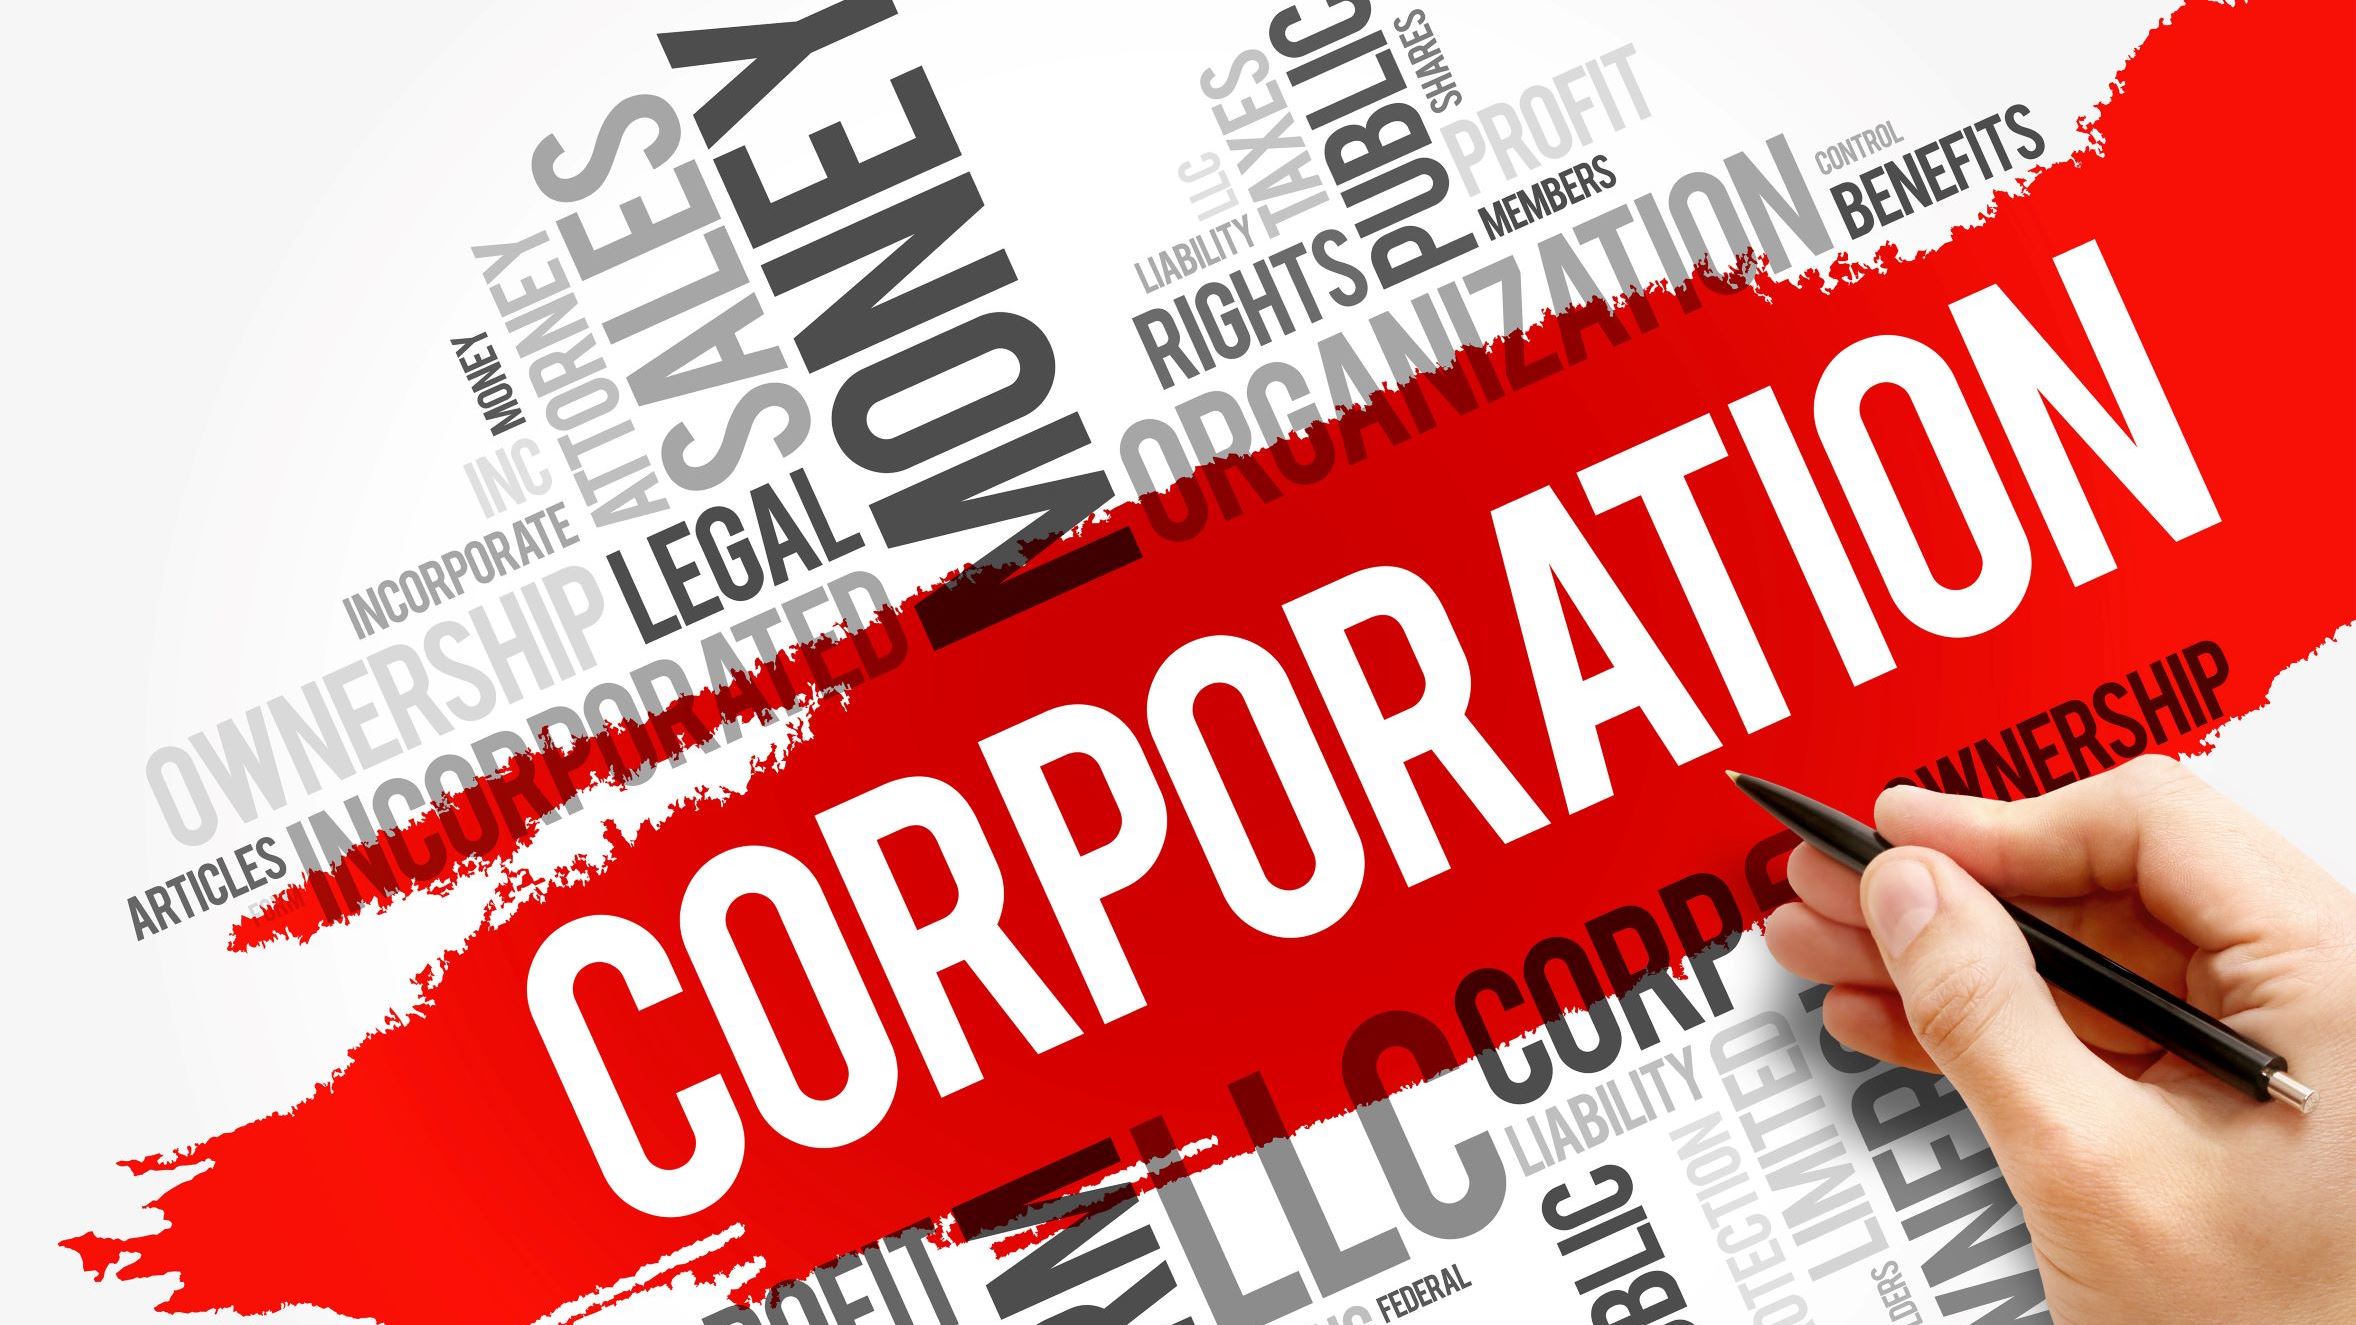 Image showing corporation tax